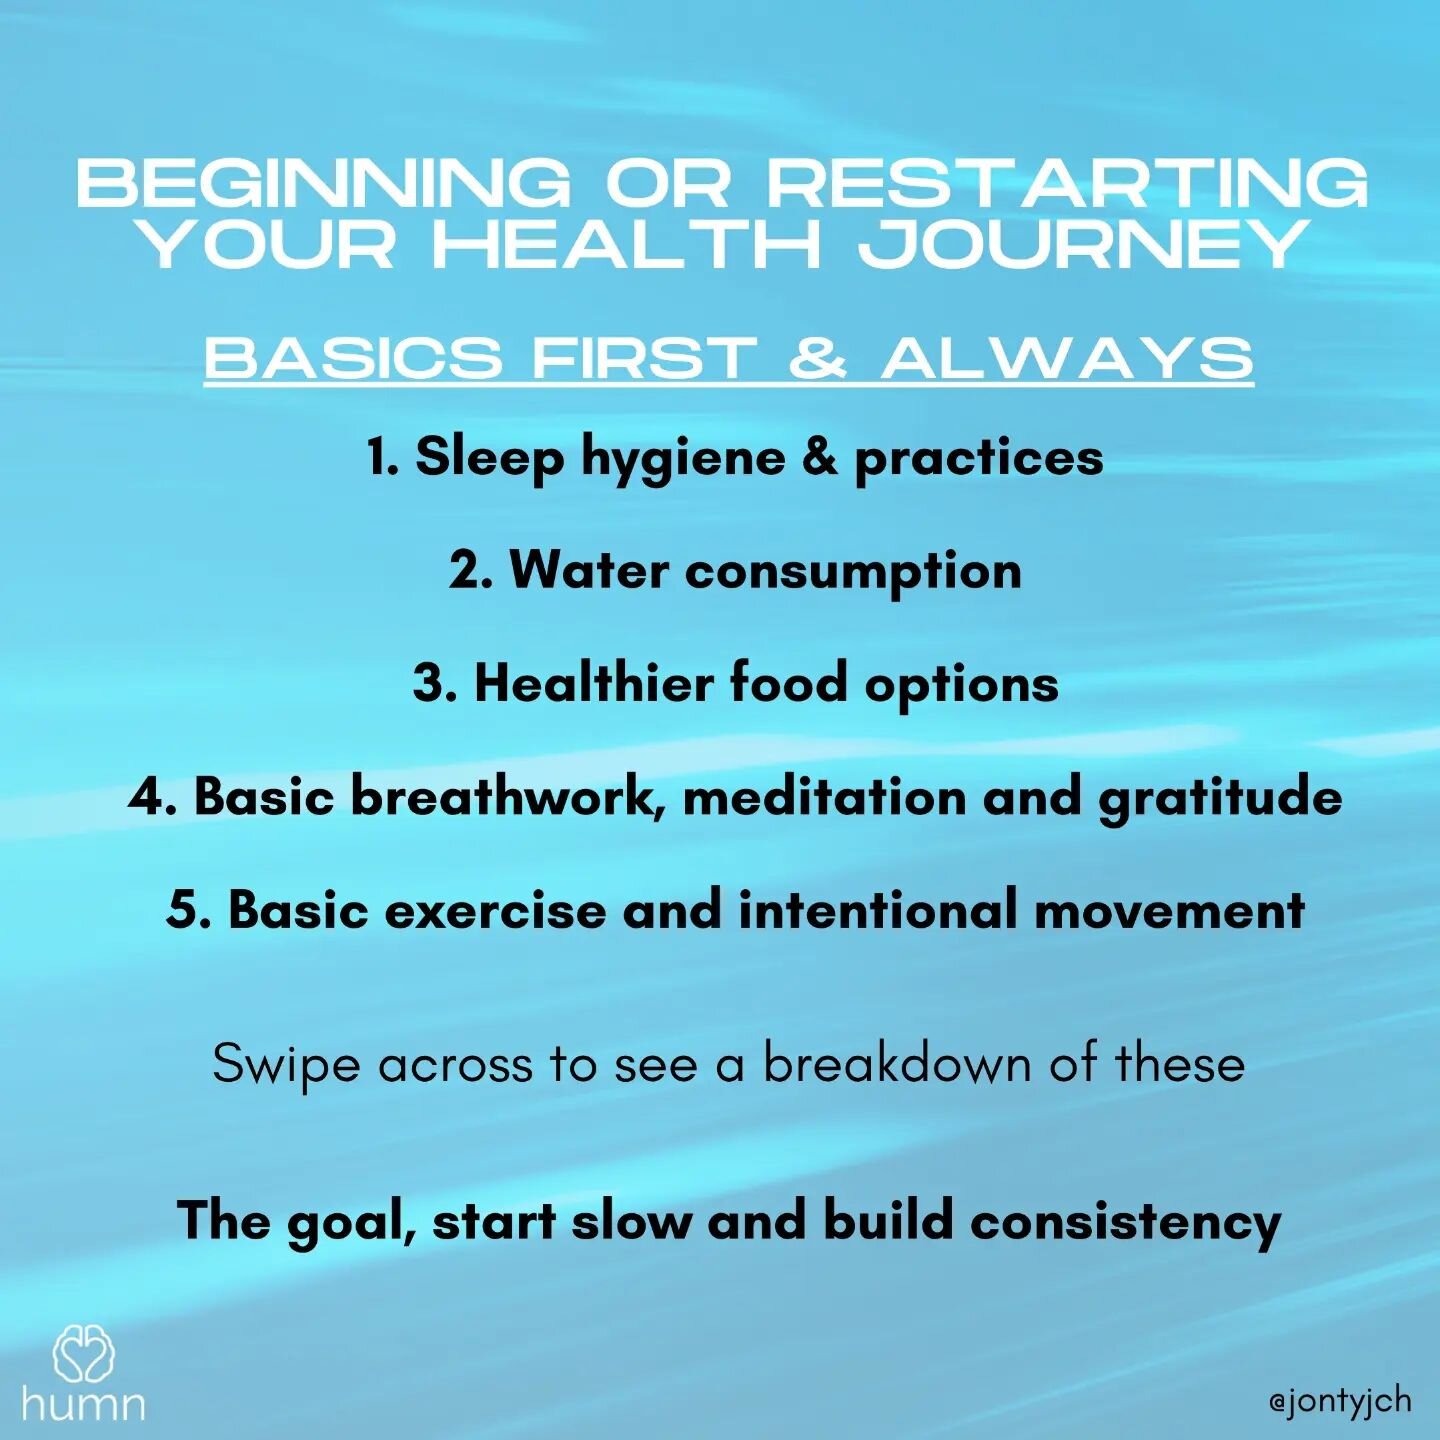 The basics are the foundations for a healthy life 🙌

When you get these fundamentals locked in as daily habits then you are creating a solid long term health strategy💪 

Please share in comments any other basics you think would add to this list 👀
